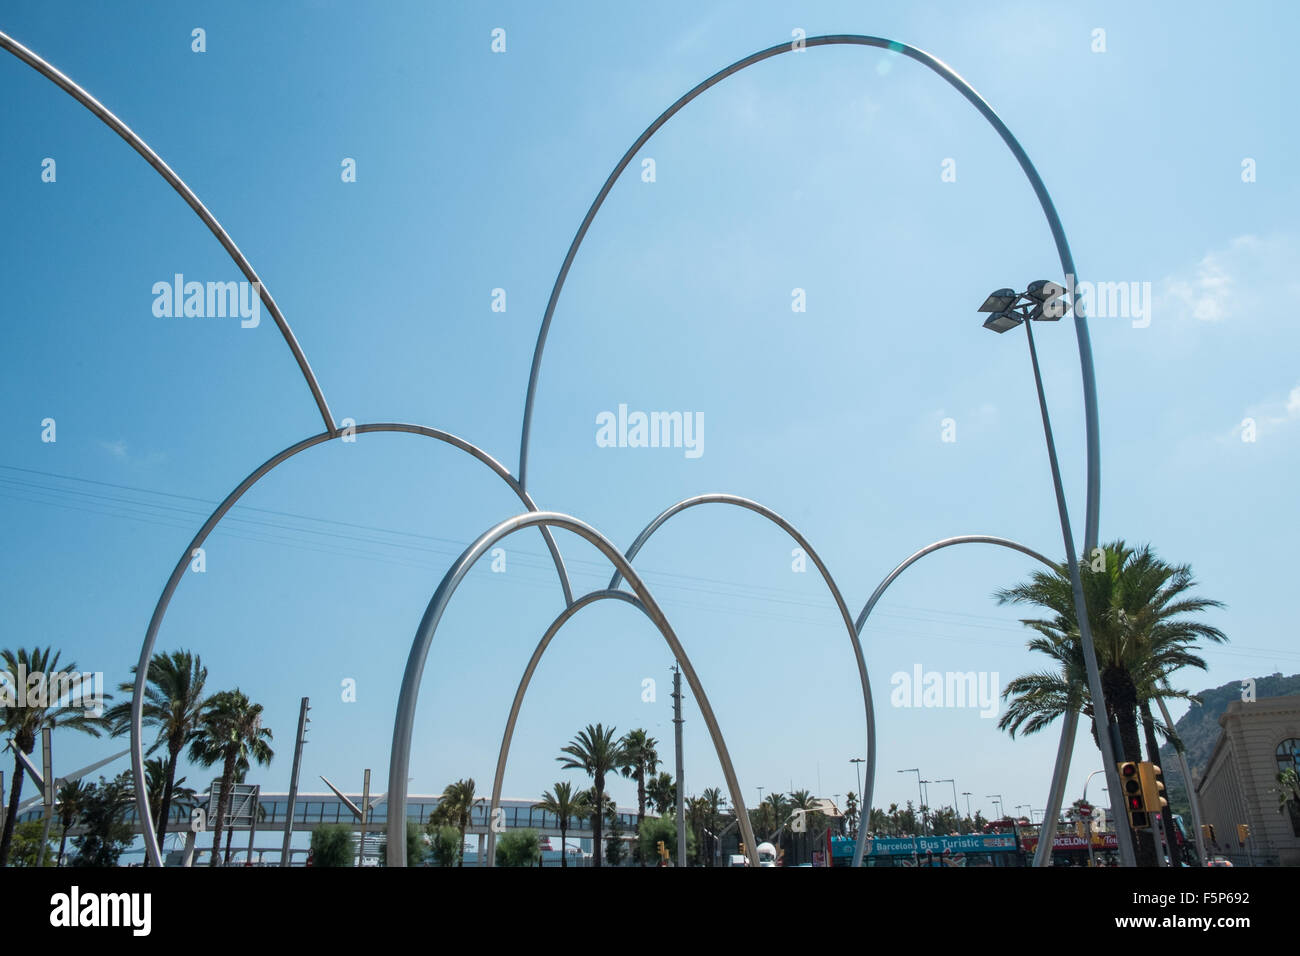 'Ones' sculpture composed of seven steel tubes by artist Andreu Alfaro, Les Drassanes Square, Barcelona, Catalonia, Spain Stock Photo